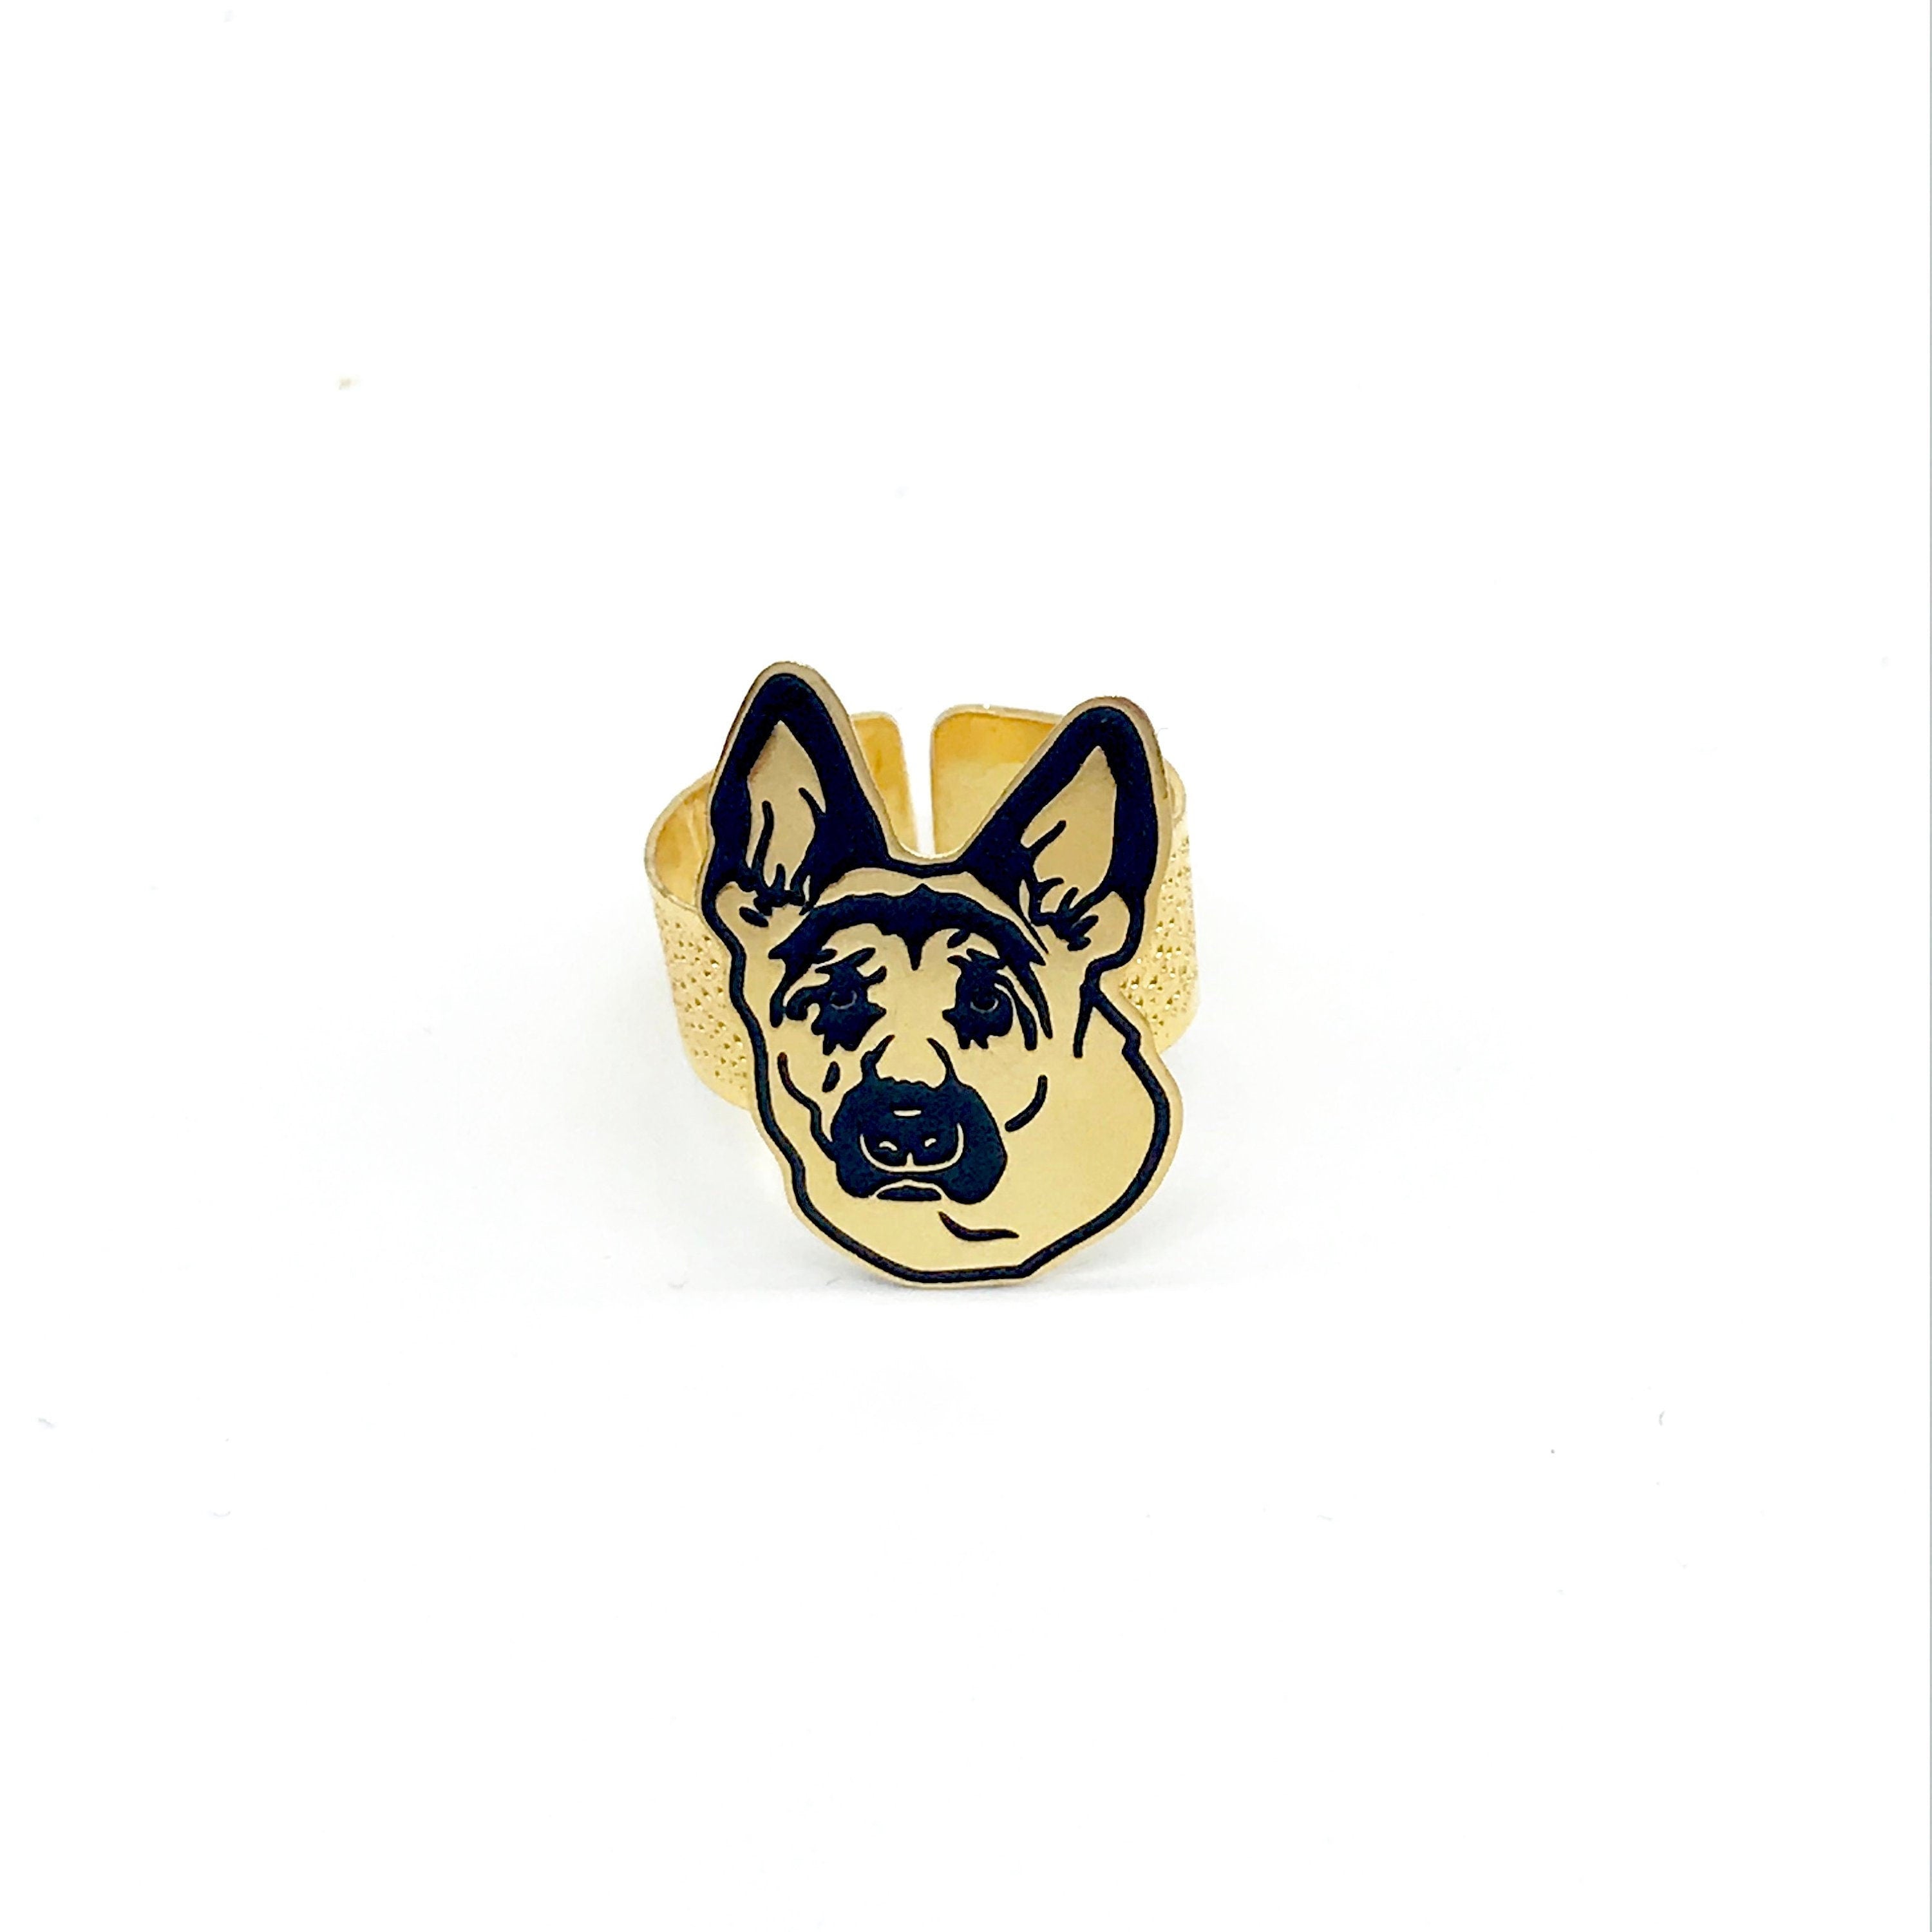 GERMAN SHEPHERD RING, dog breeds, pet lovers, ring  women, unique jewelry, ring, dog lovers, dog rescue, fashion jewelry